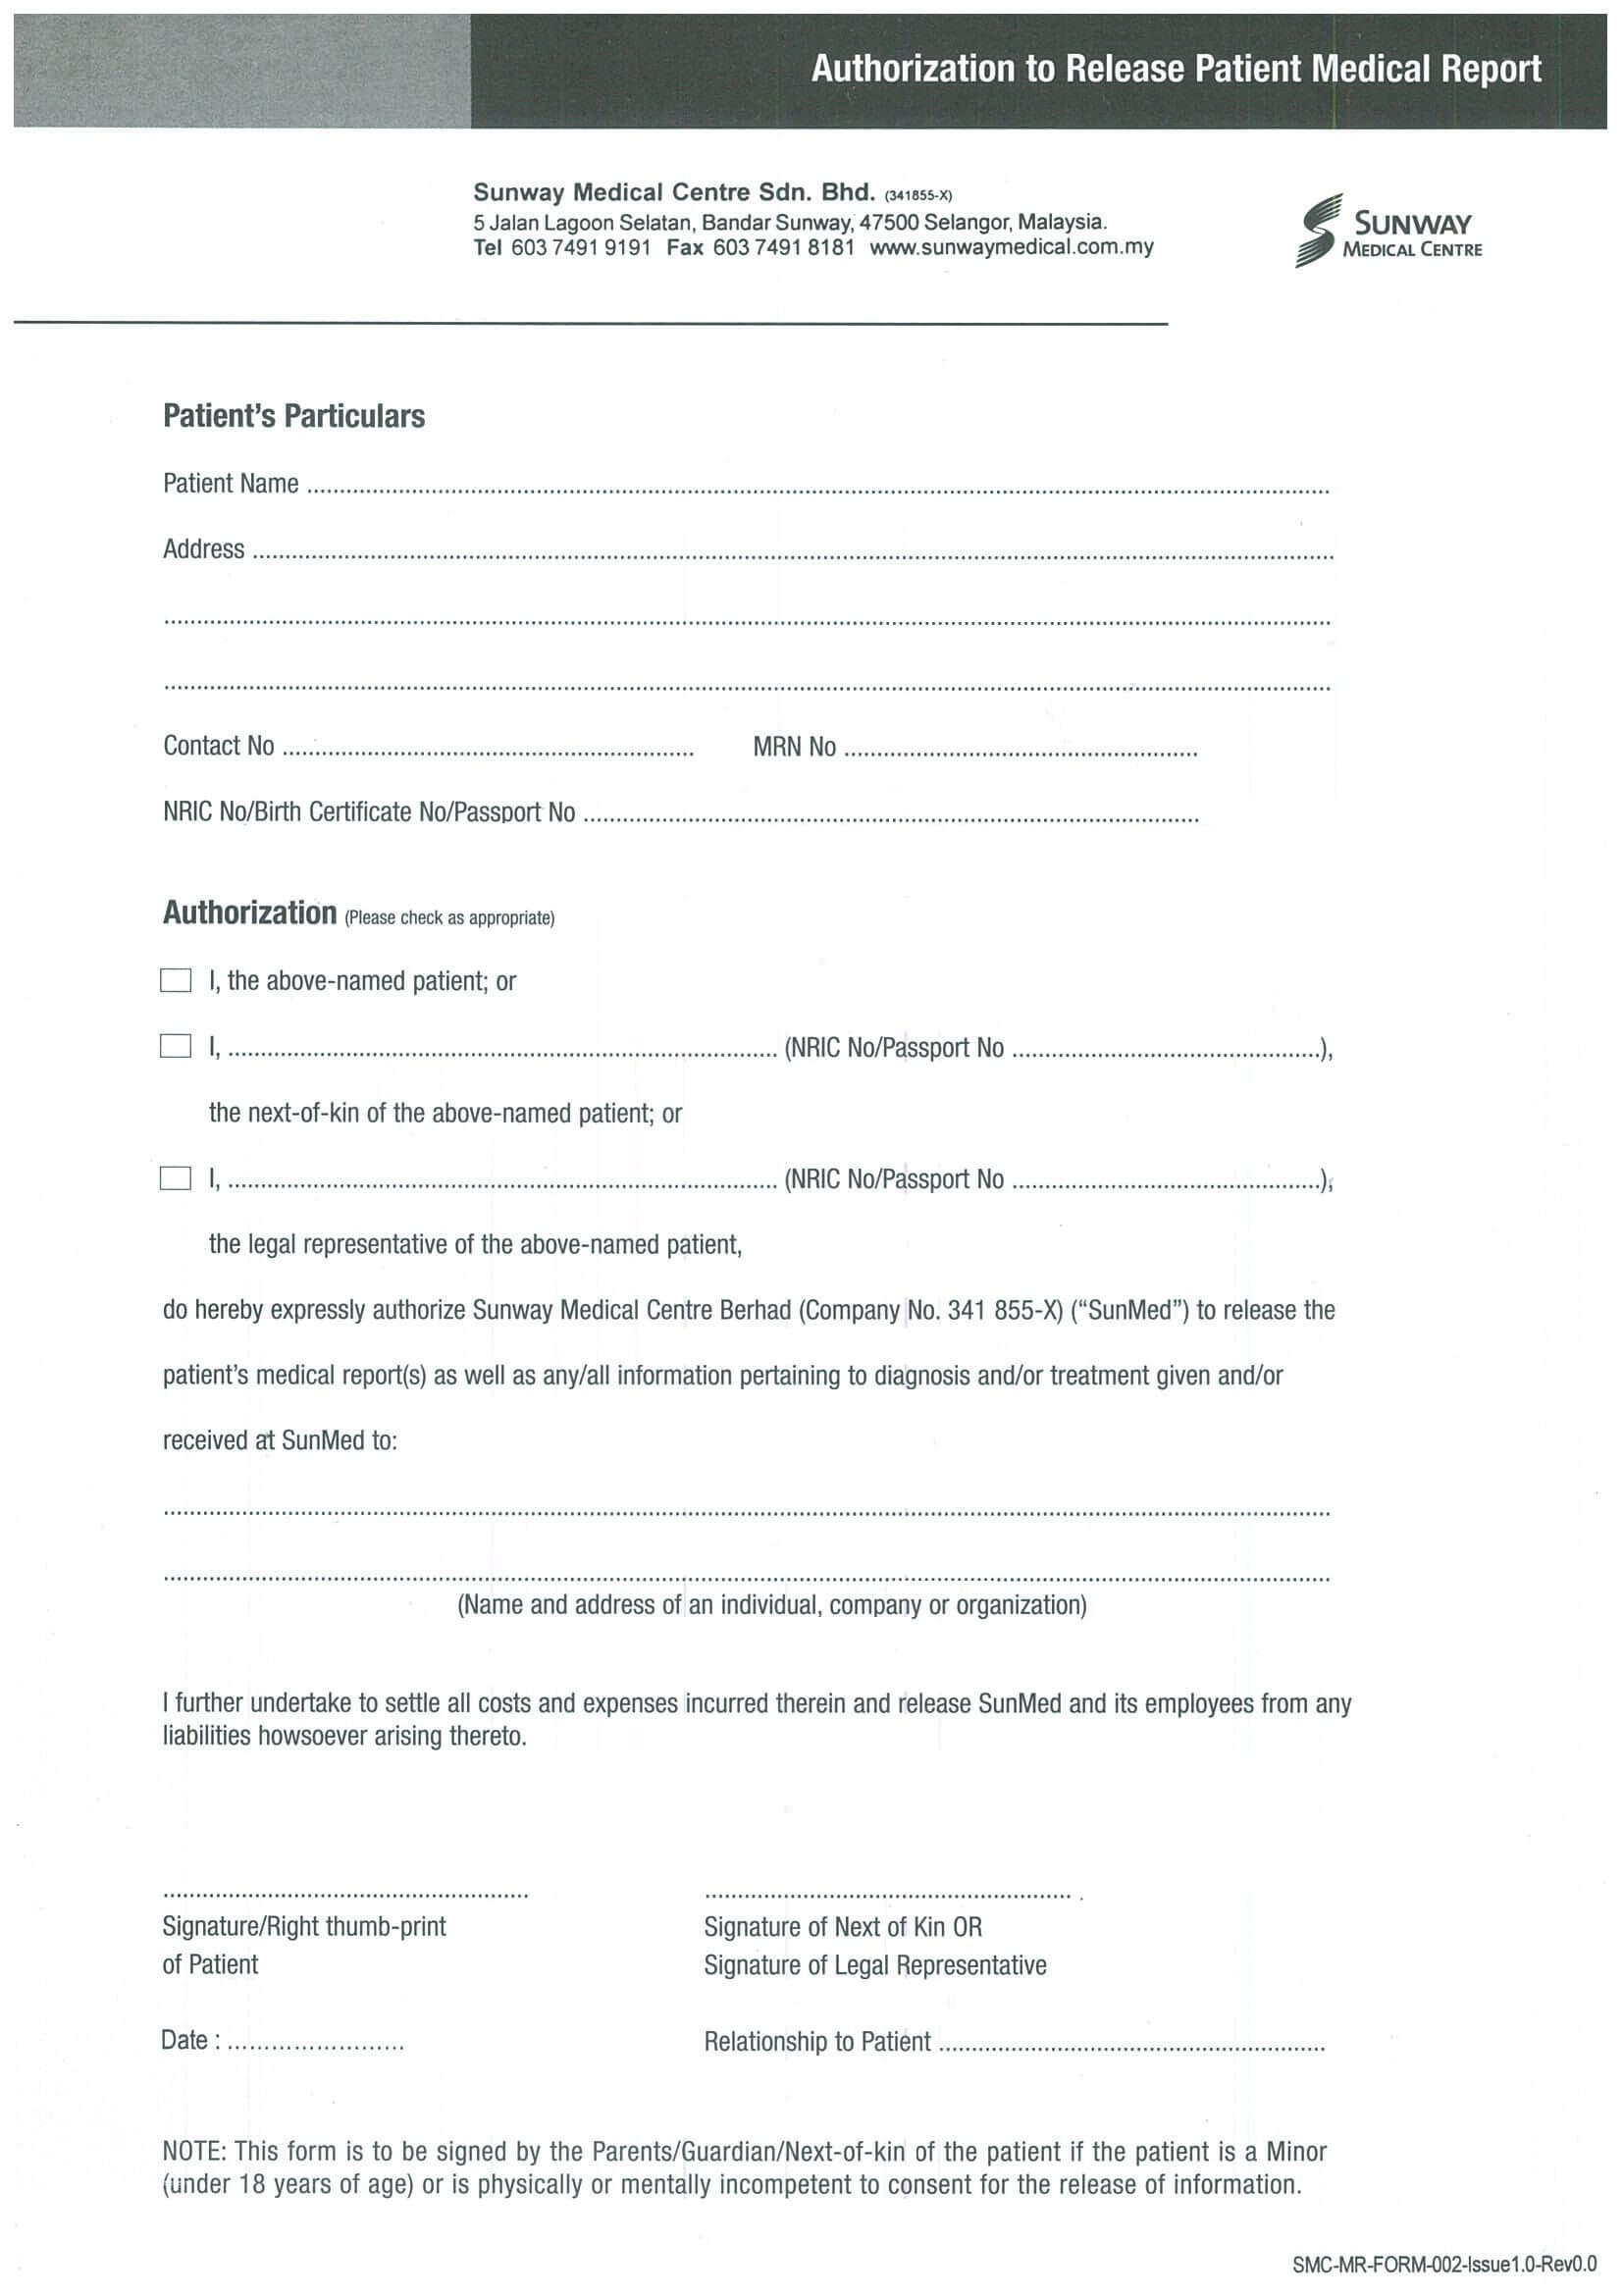 Request For Medical Report Sunway Centre You May Download With Medical Report Template Free Downloads